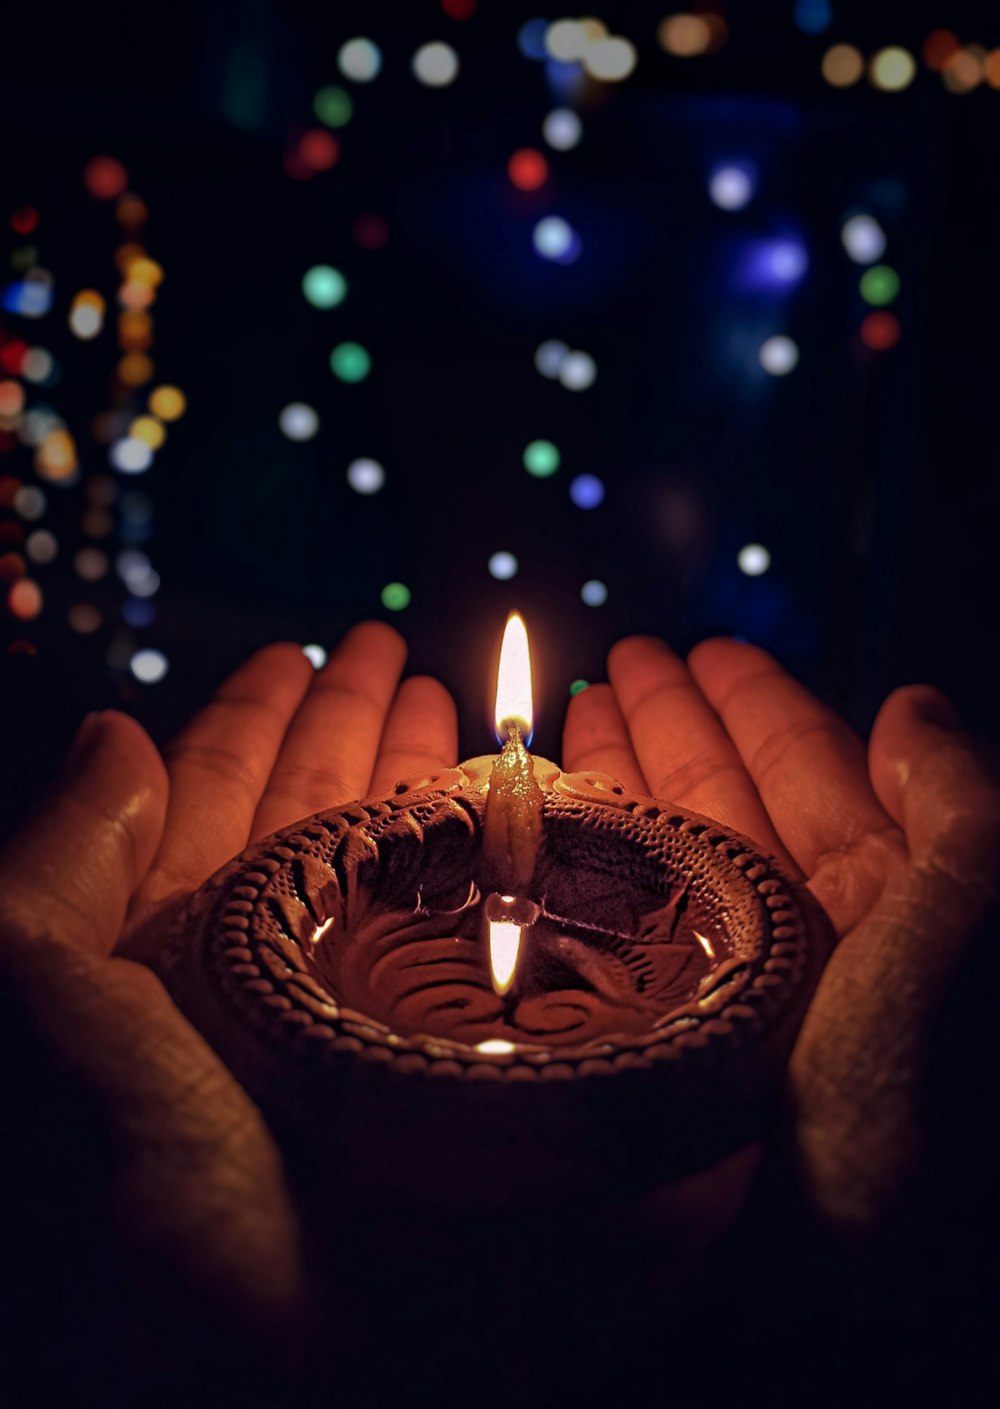 “Extraordinary Collection of Full 4K Diwali Images for Download – 999+ Options Available”